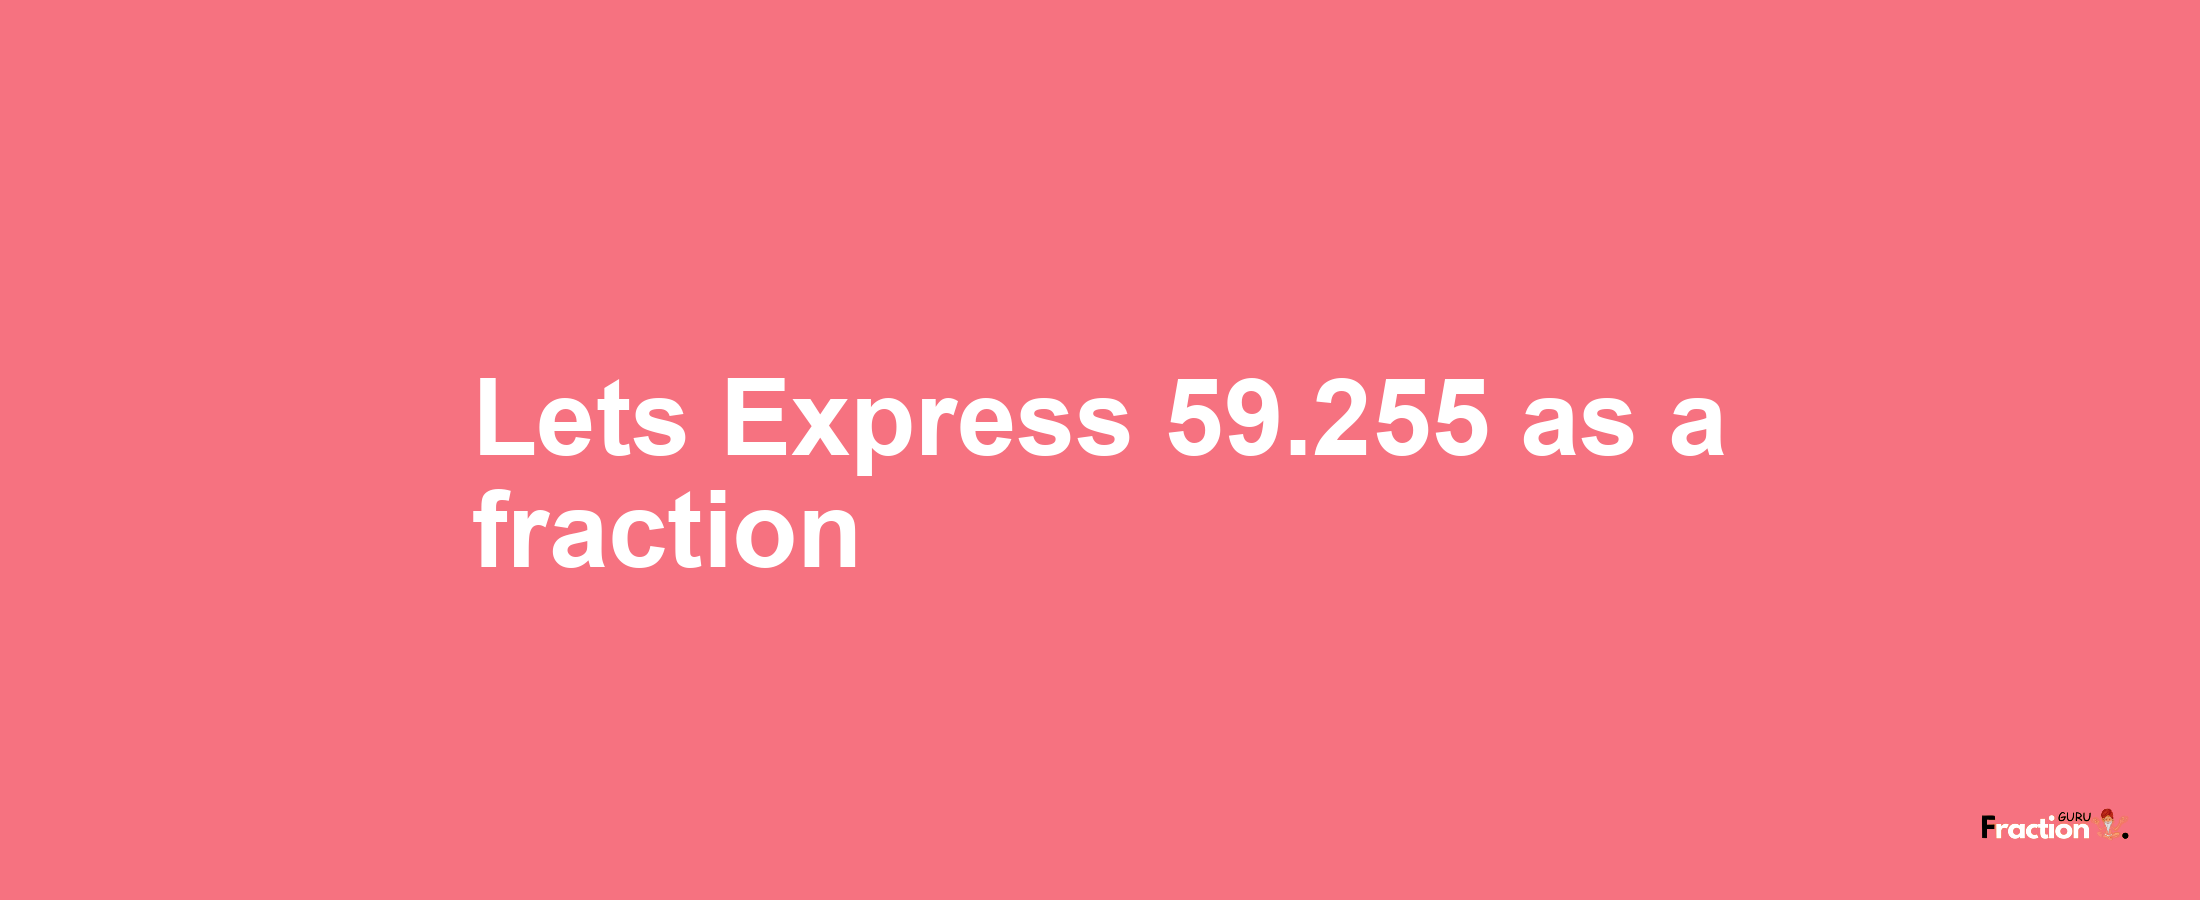 Lets Express 59.255 as afraction